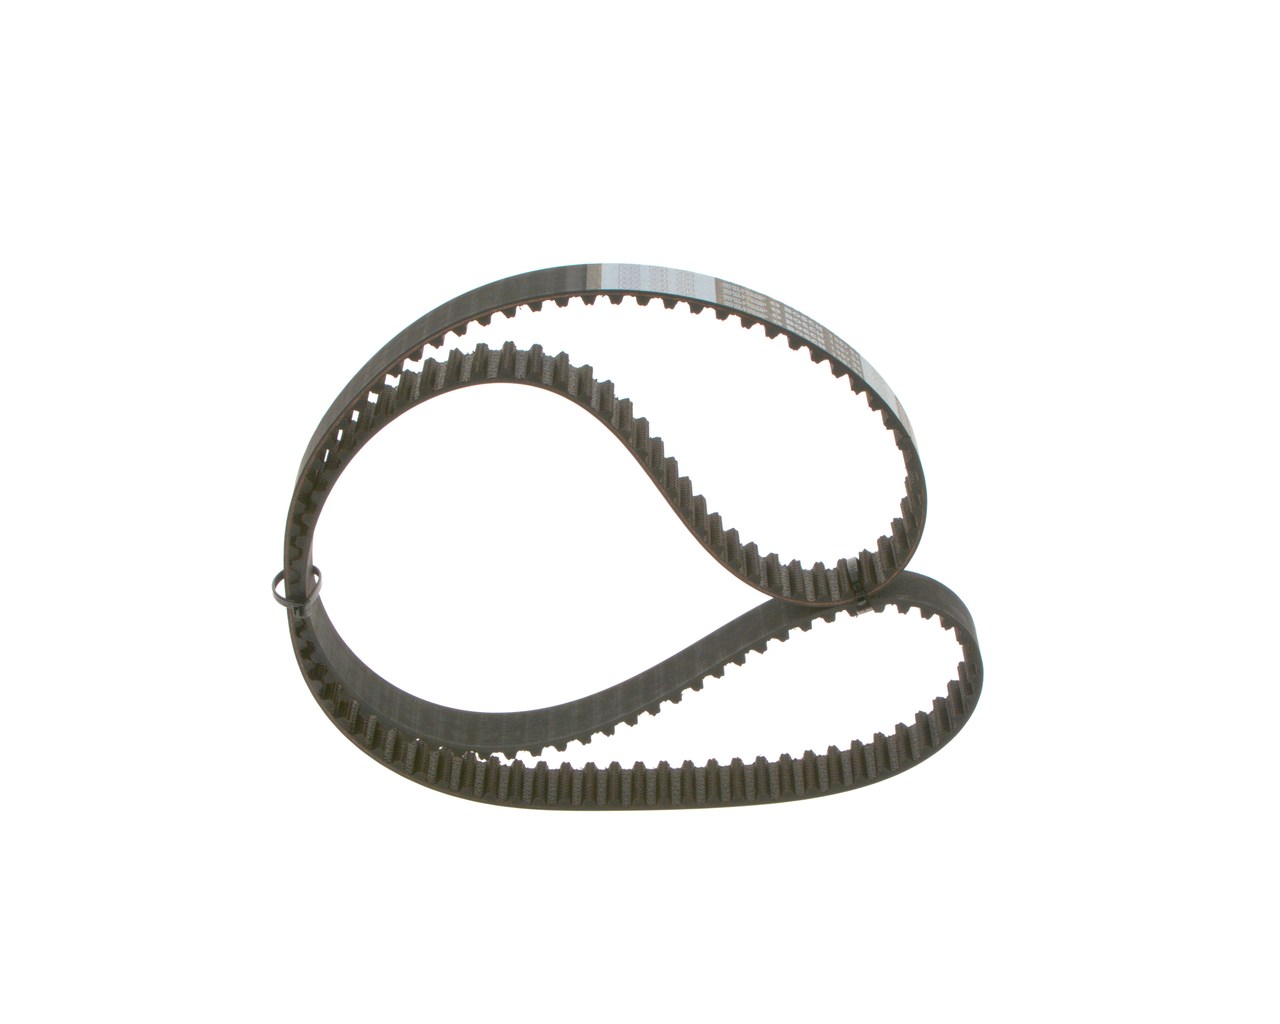 1987949413, Timing Belt, BOSCH, 081693, 9400816939, K9400816939, SU00100085, 9622313180, 9622315380, 9625215380, 140HTDP25, 140RP+254H, 5523XS, CT986, 140SP+254H, 94808